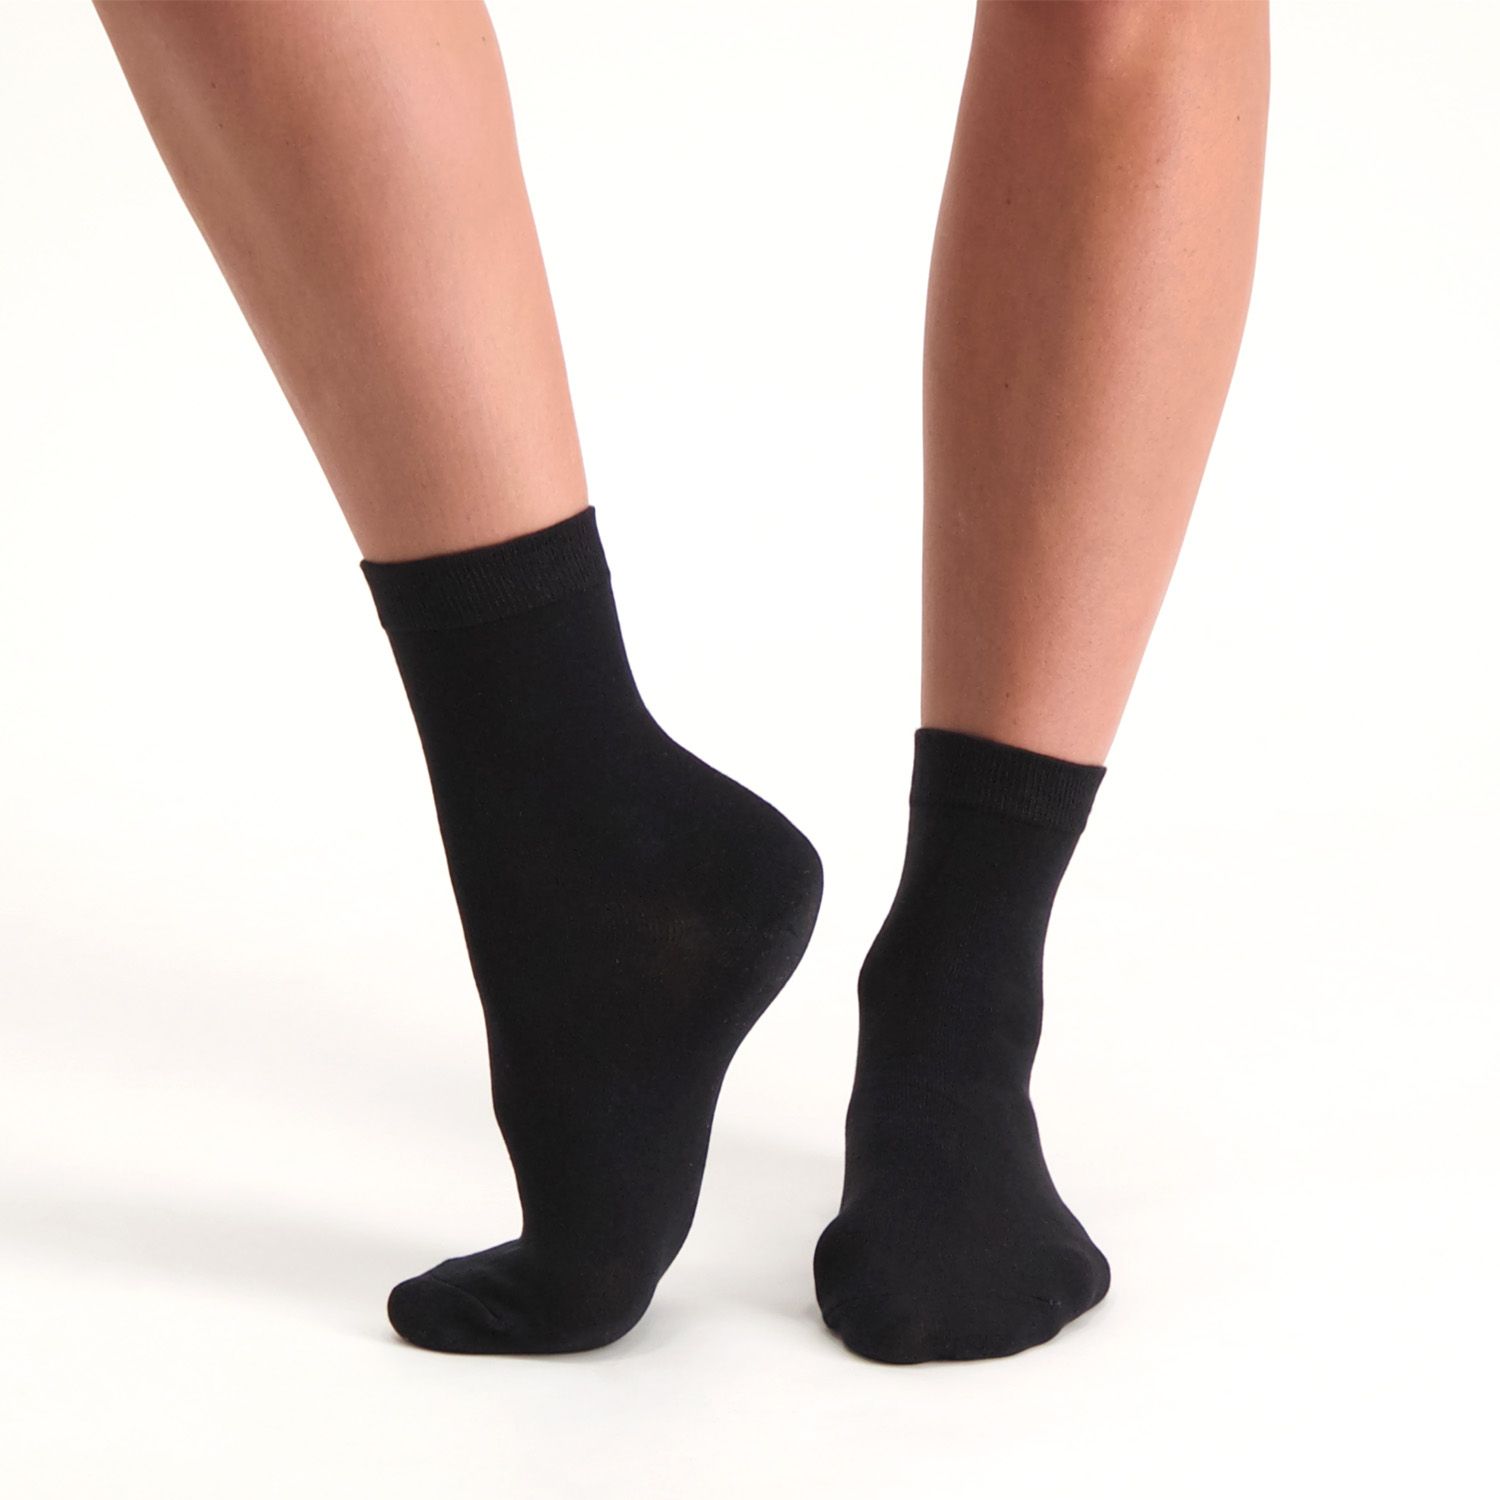 solelution socks with silicone gel heel product information